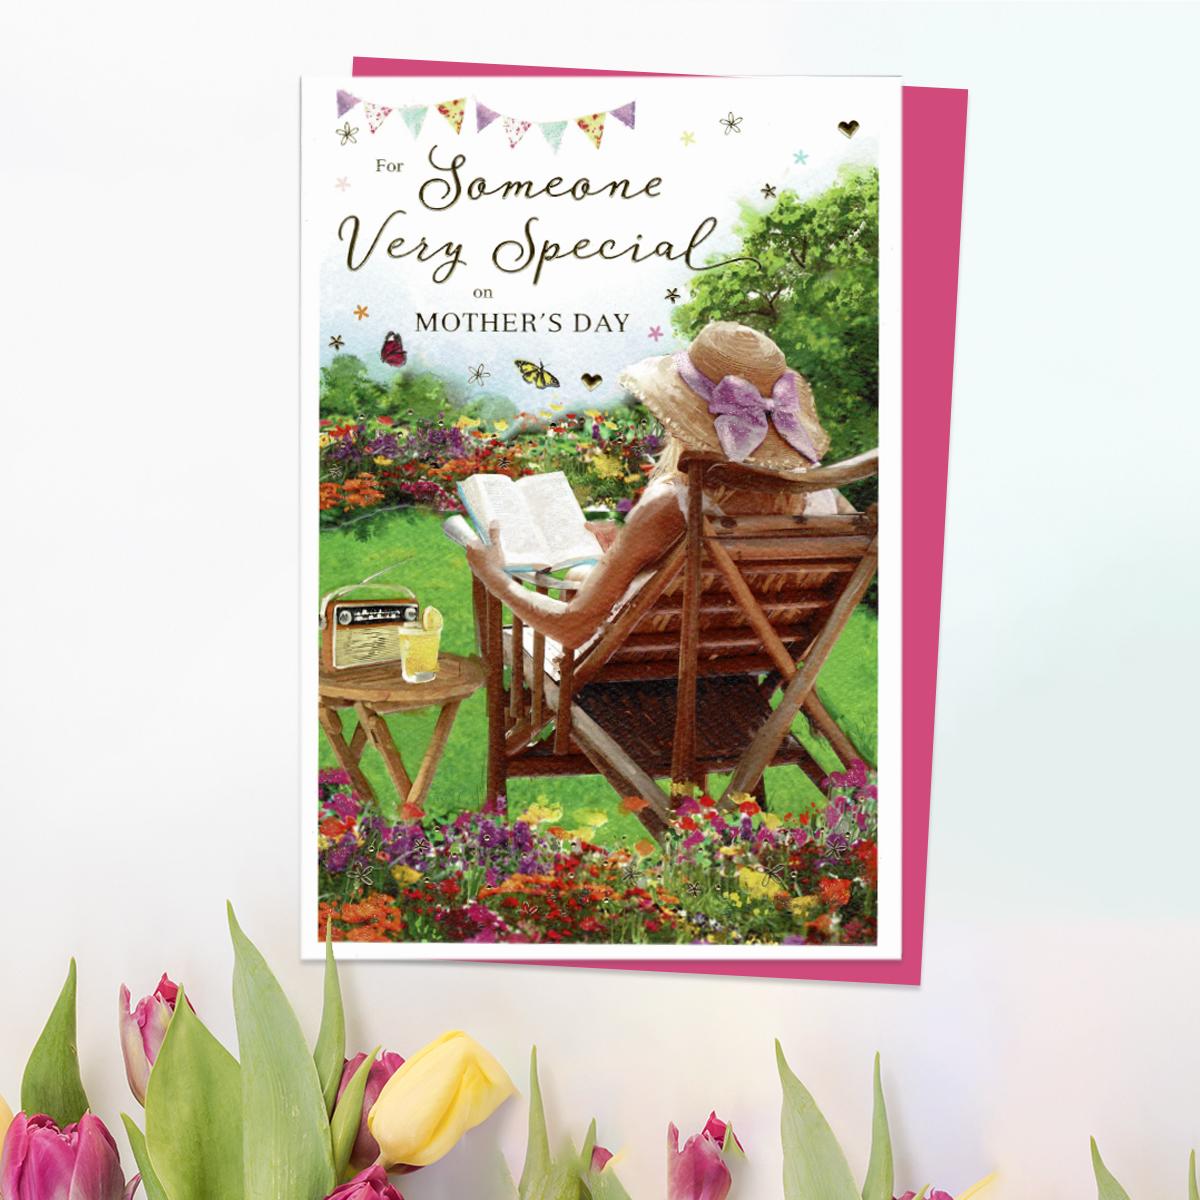 ' For Someone Very Special On Mother's Day' Card Featuring A Lady Sitting In the Garden Reading. With Beautiful Gold Foil Detail And Cerise Envelope